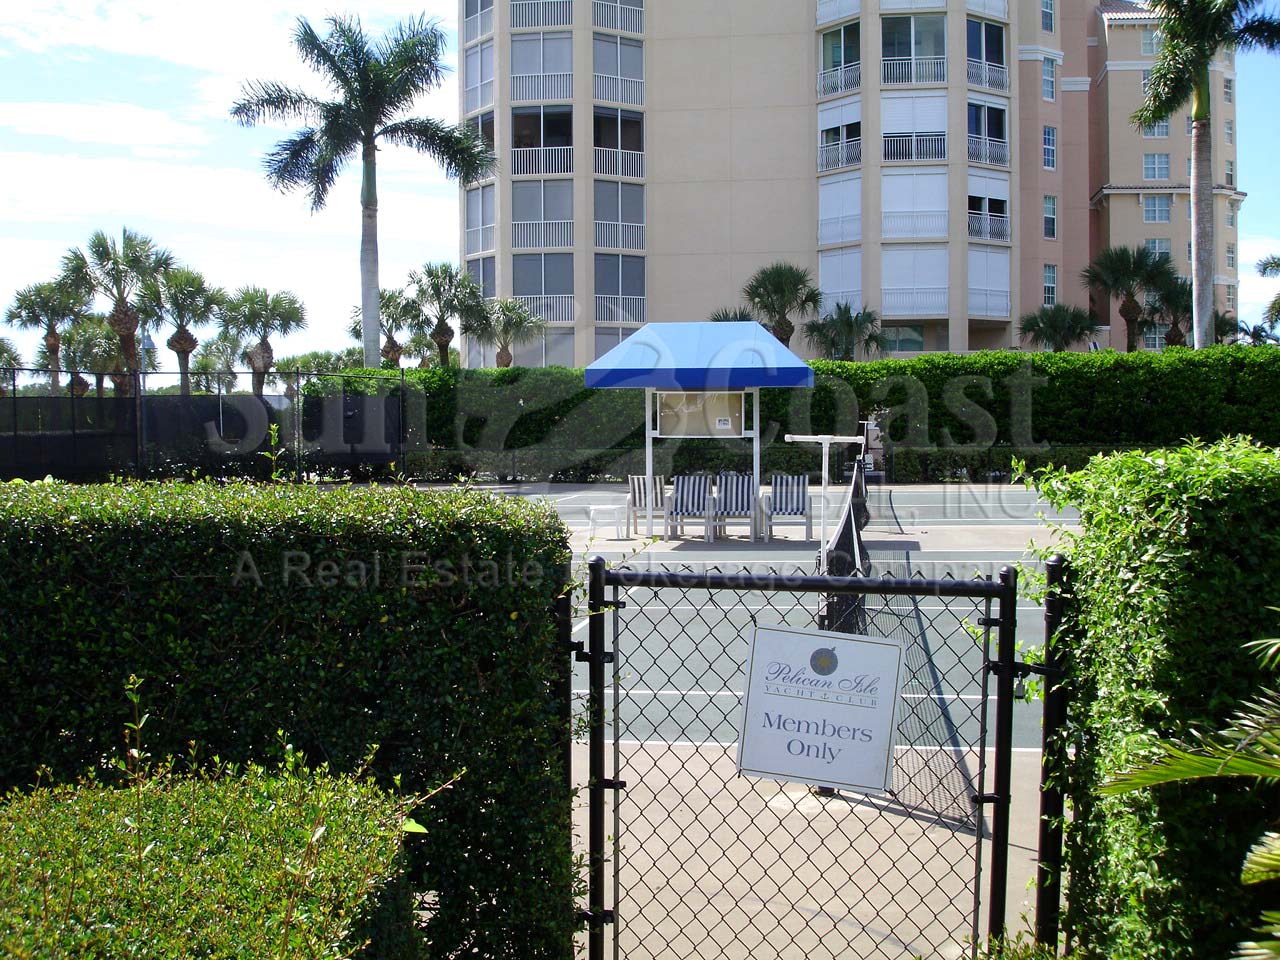 PELICAN ISLE Entrance to the Yacht Club Tennis Court